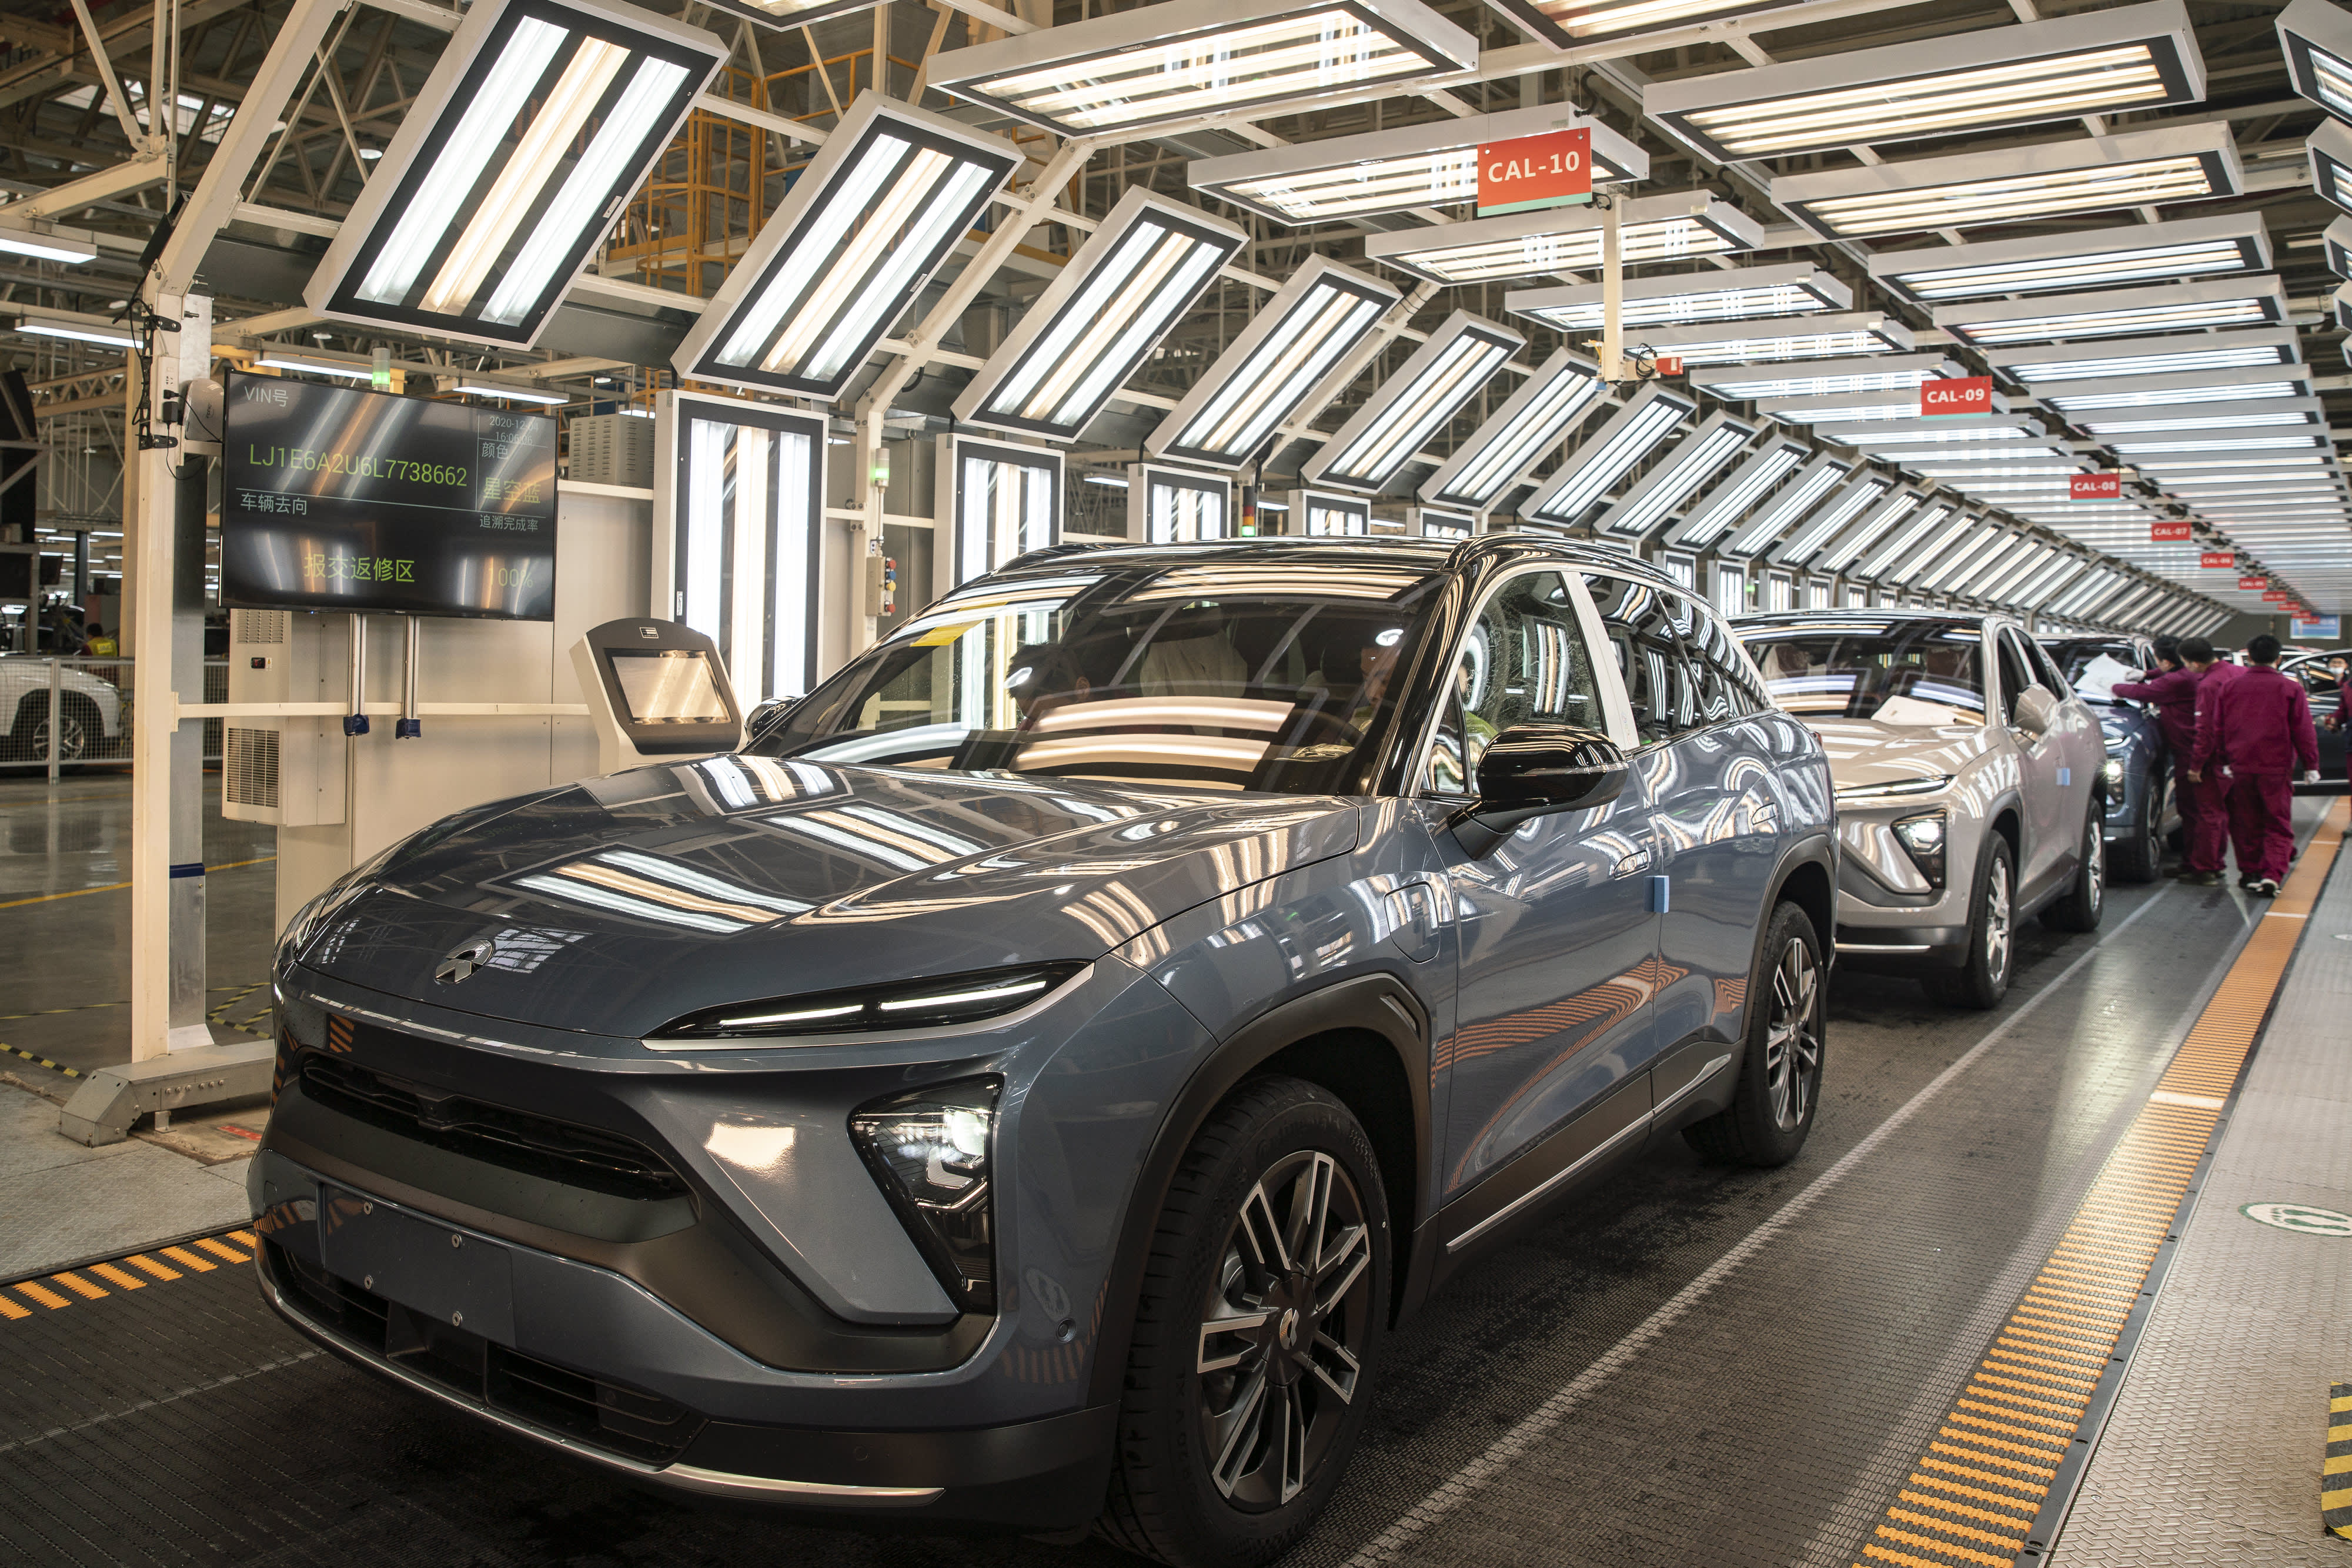 Nio and Tesla are fighting for dominance in the Chinese electric vehicle market